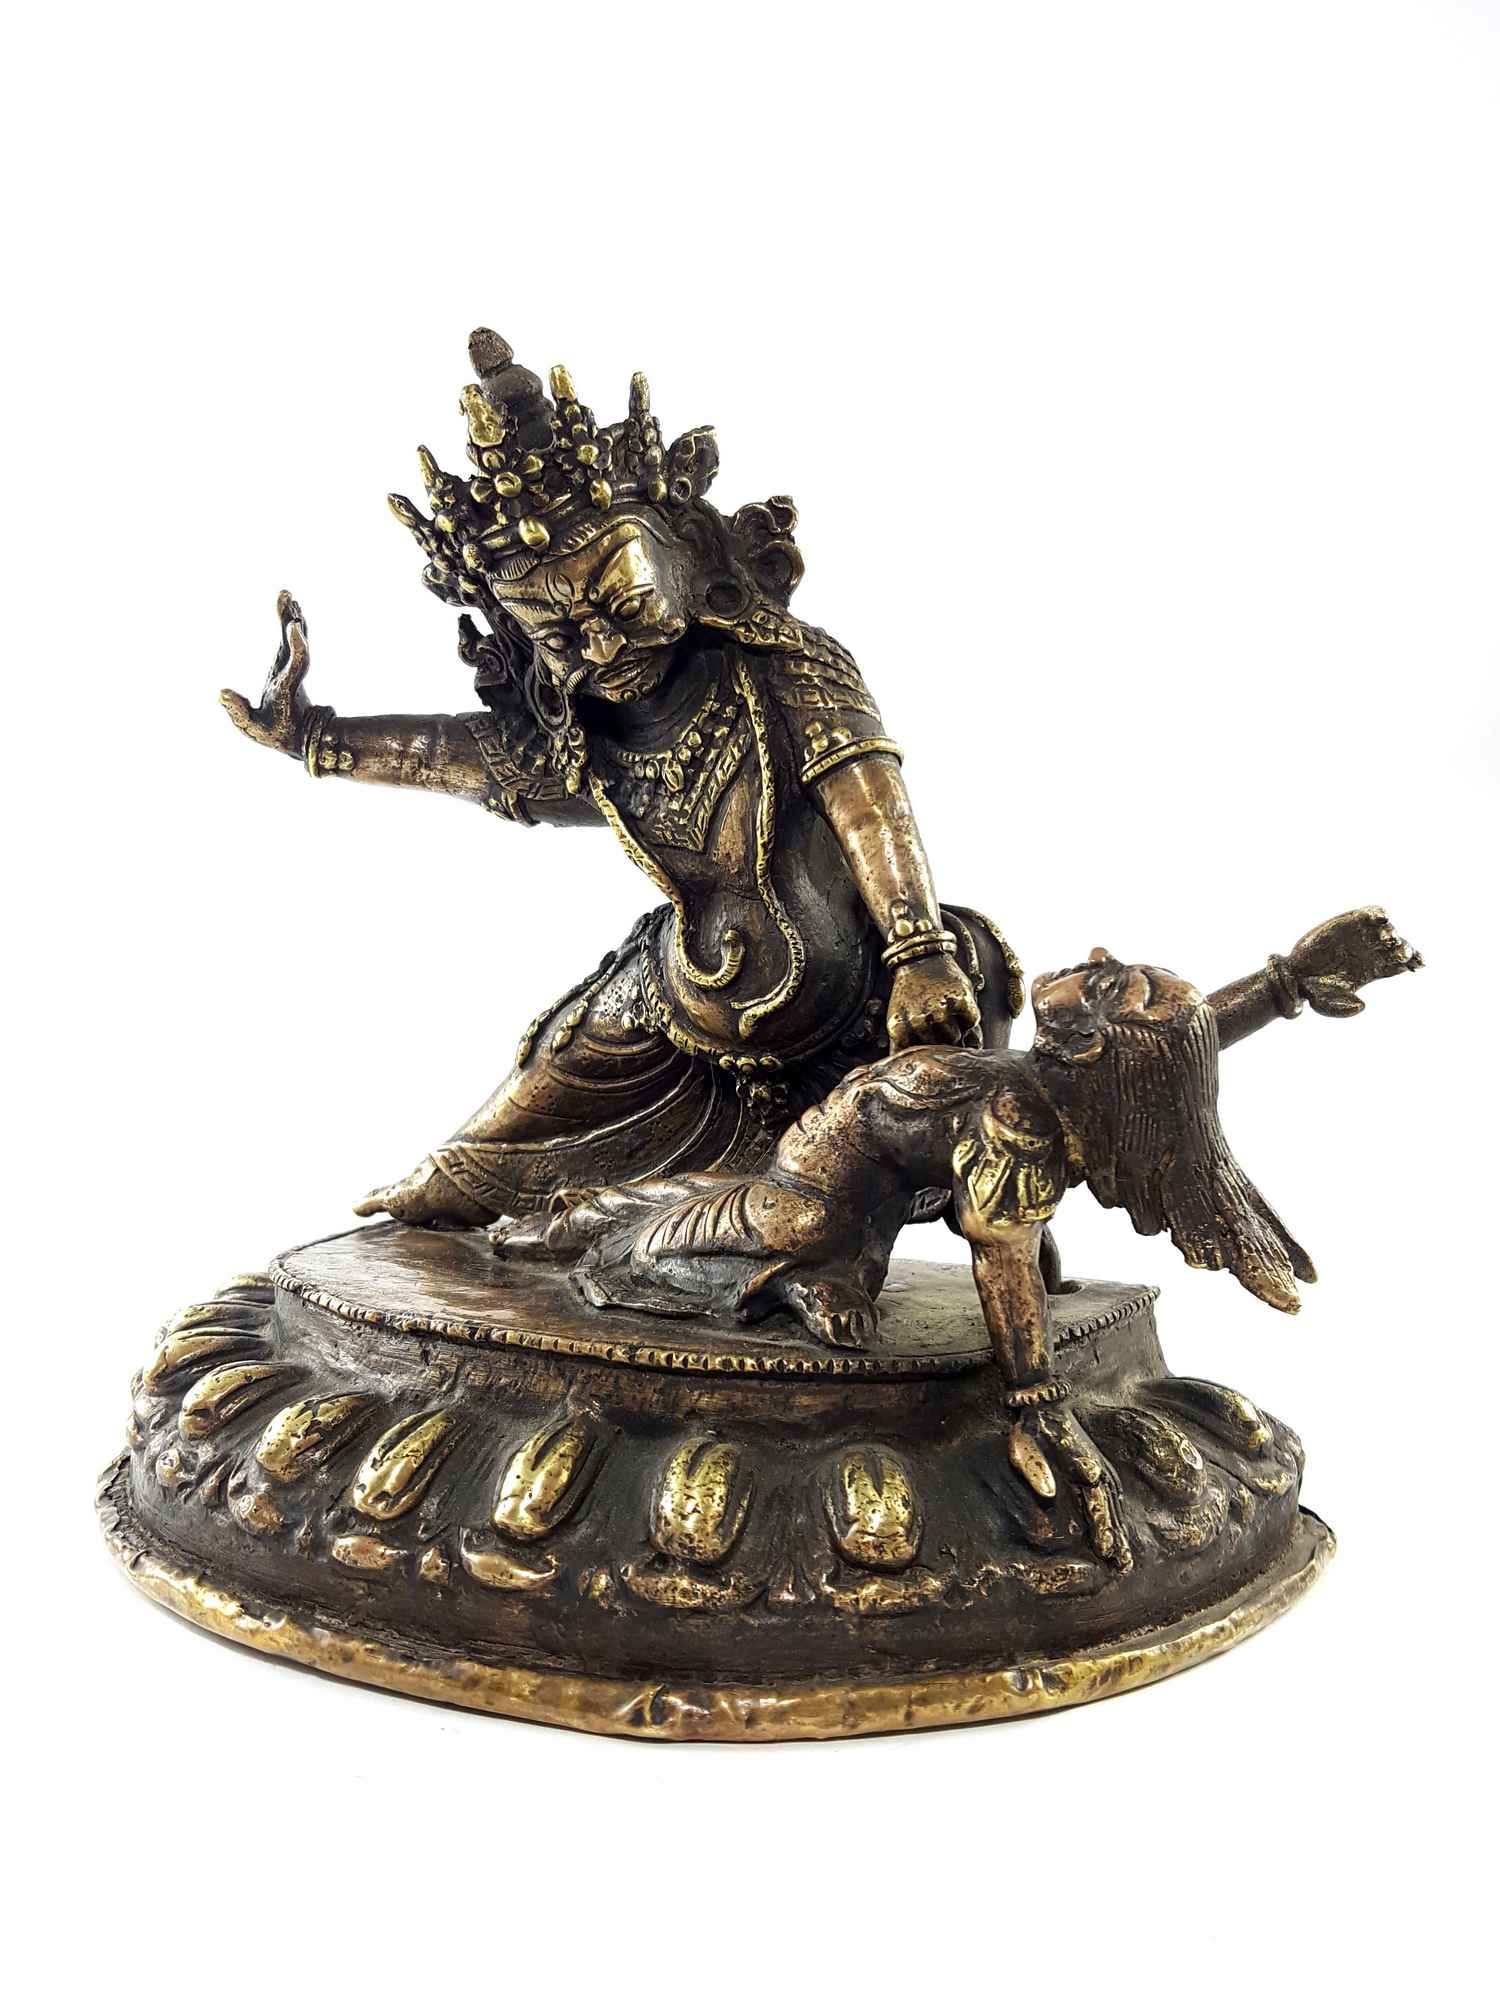 Exquisite And Rare Nepali Bhimsen Statue antique Finishing - Perfect For Gifting And Home Décor At An Affordable Price